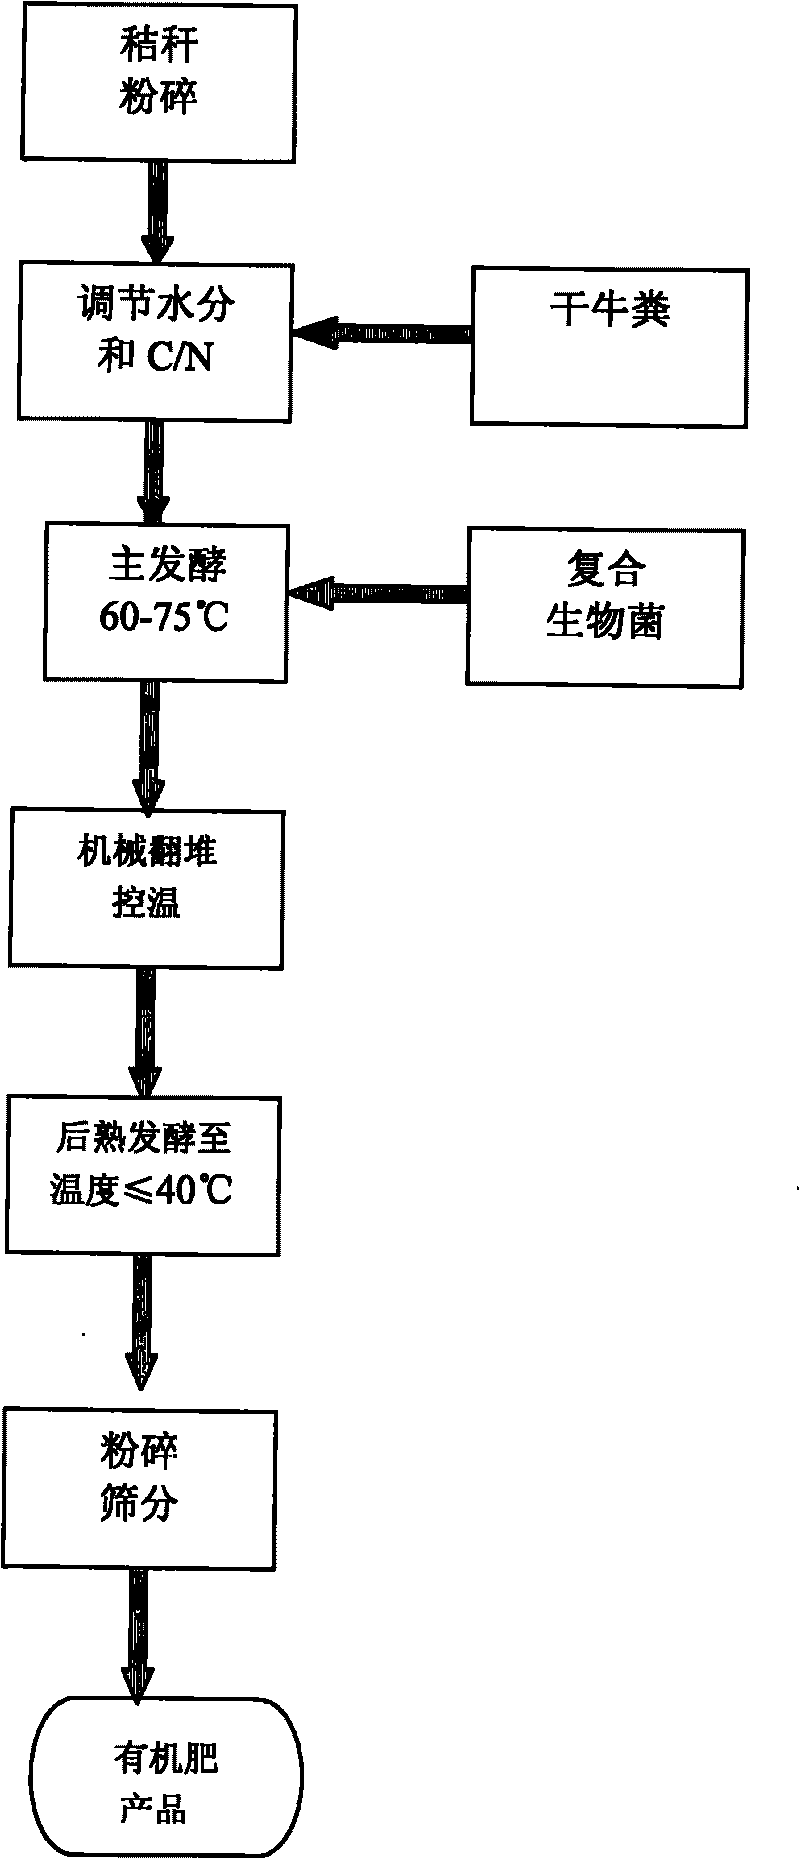 Treatment method for vegetables straw waste